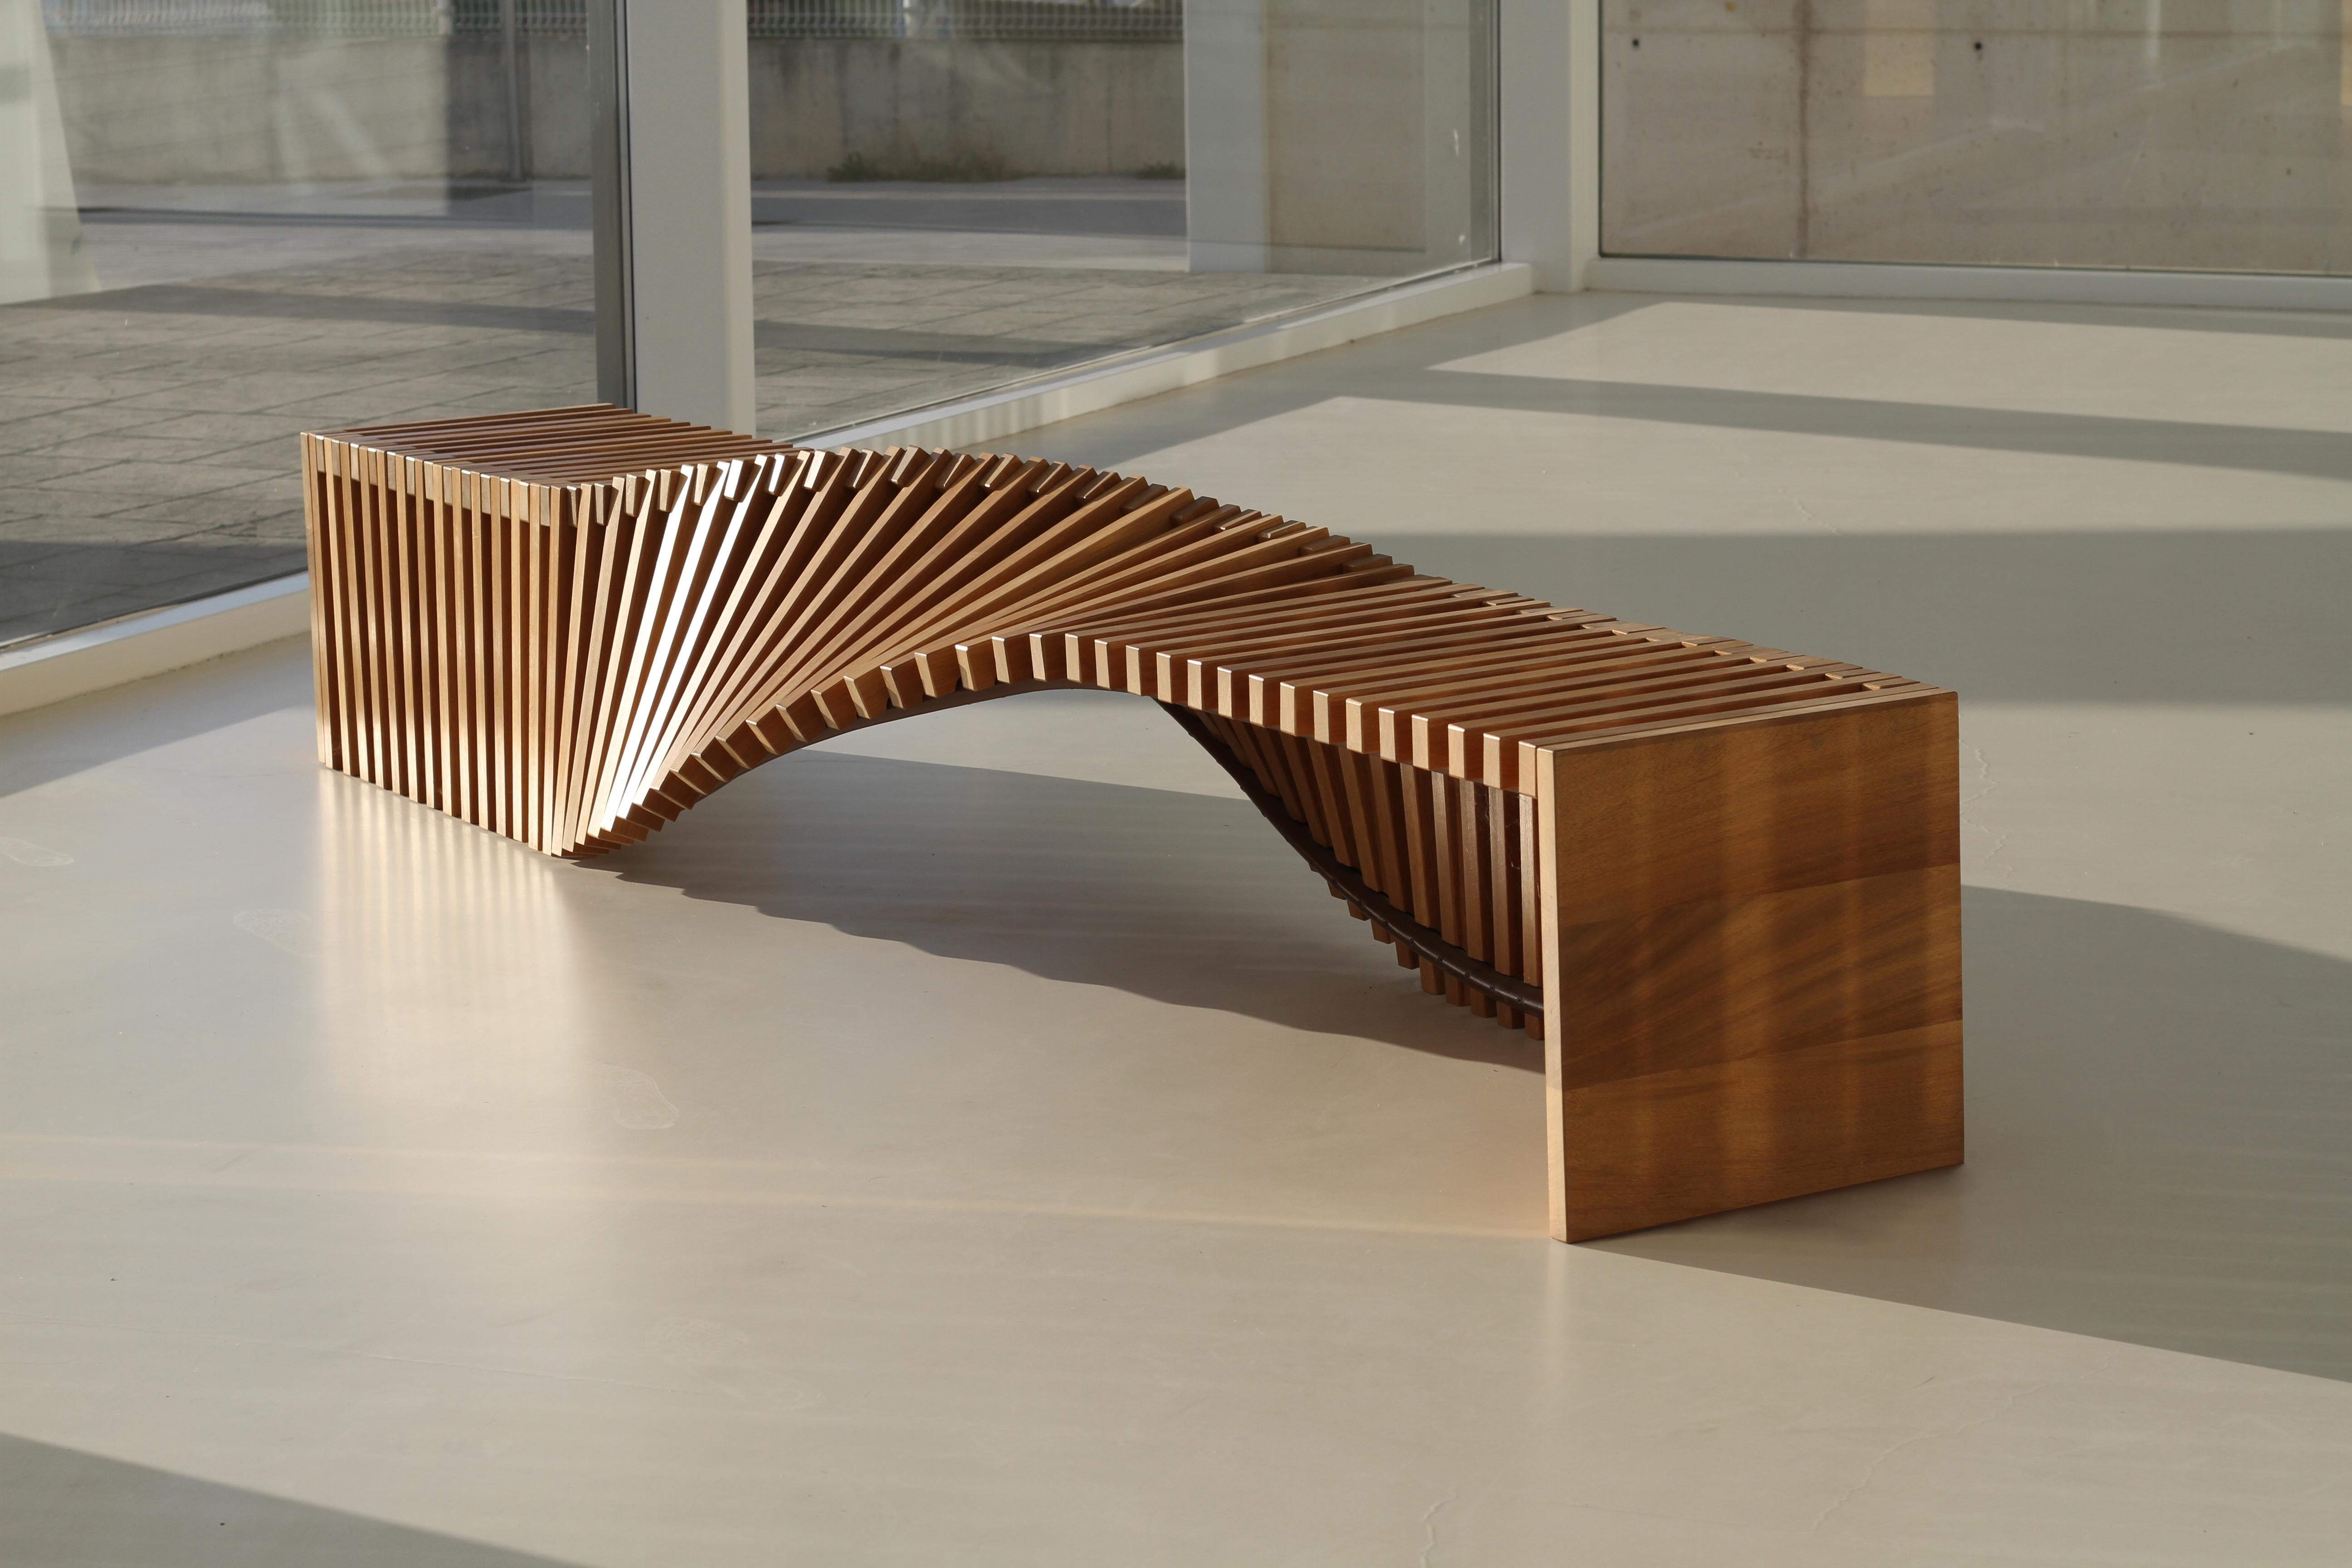 Soul sculpture wood bench medium by Veronica Mar
Dimensions: D250 x W56 x H56 cm
Materials: Iroko Wood

It is available in 2,5 meters & 3 meters long, Made in KRION® in Limited Editions. Different colors in KRION® have different prices.

Soul,